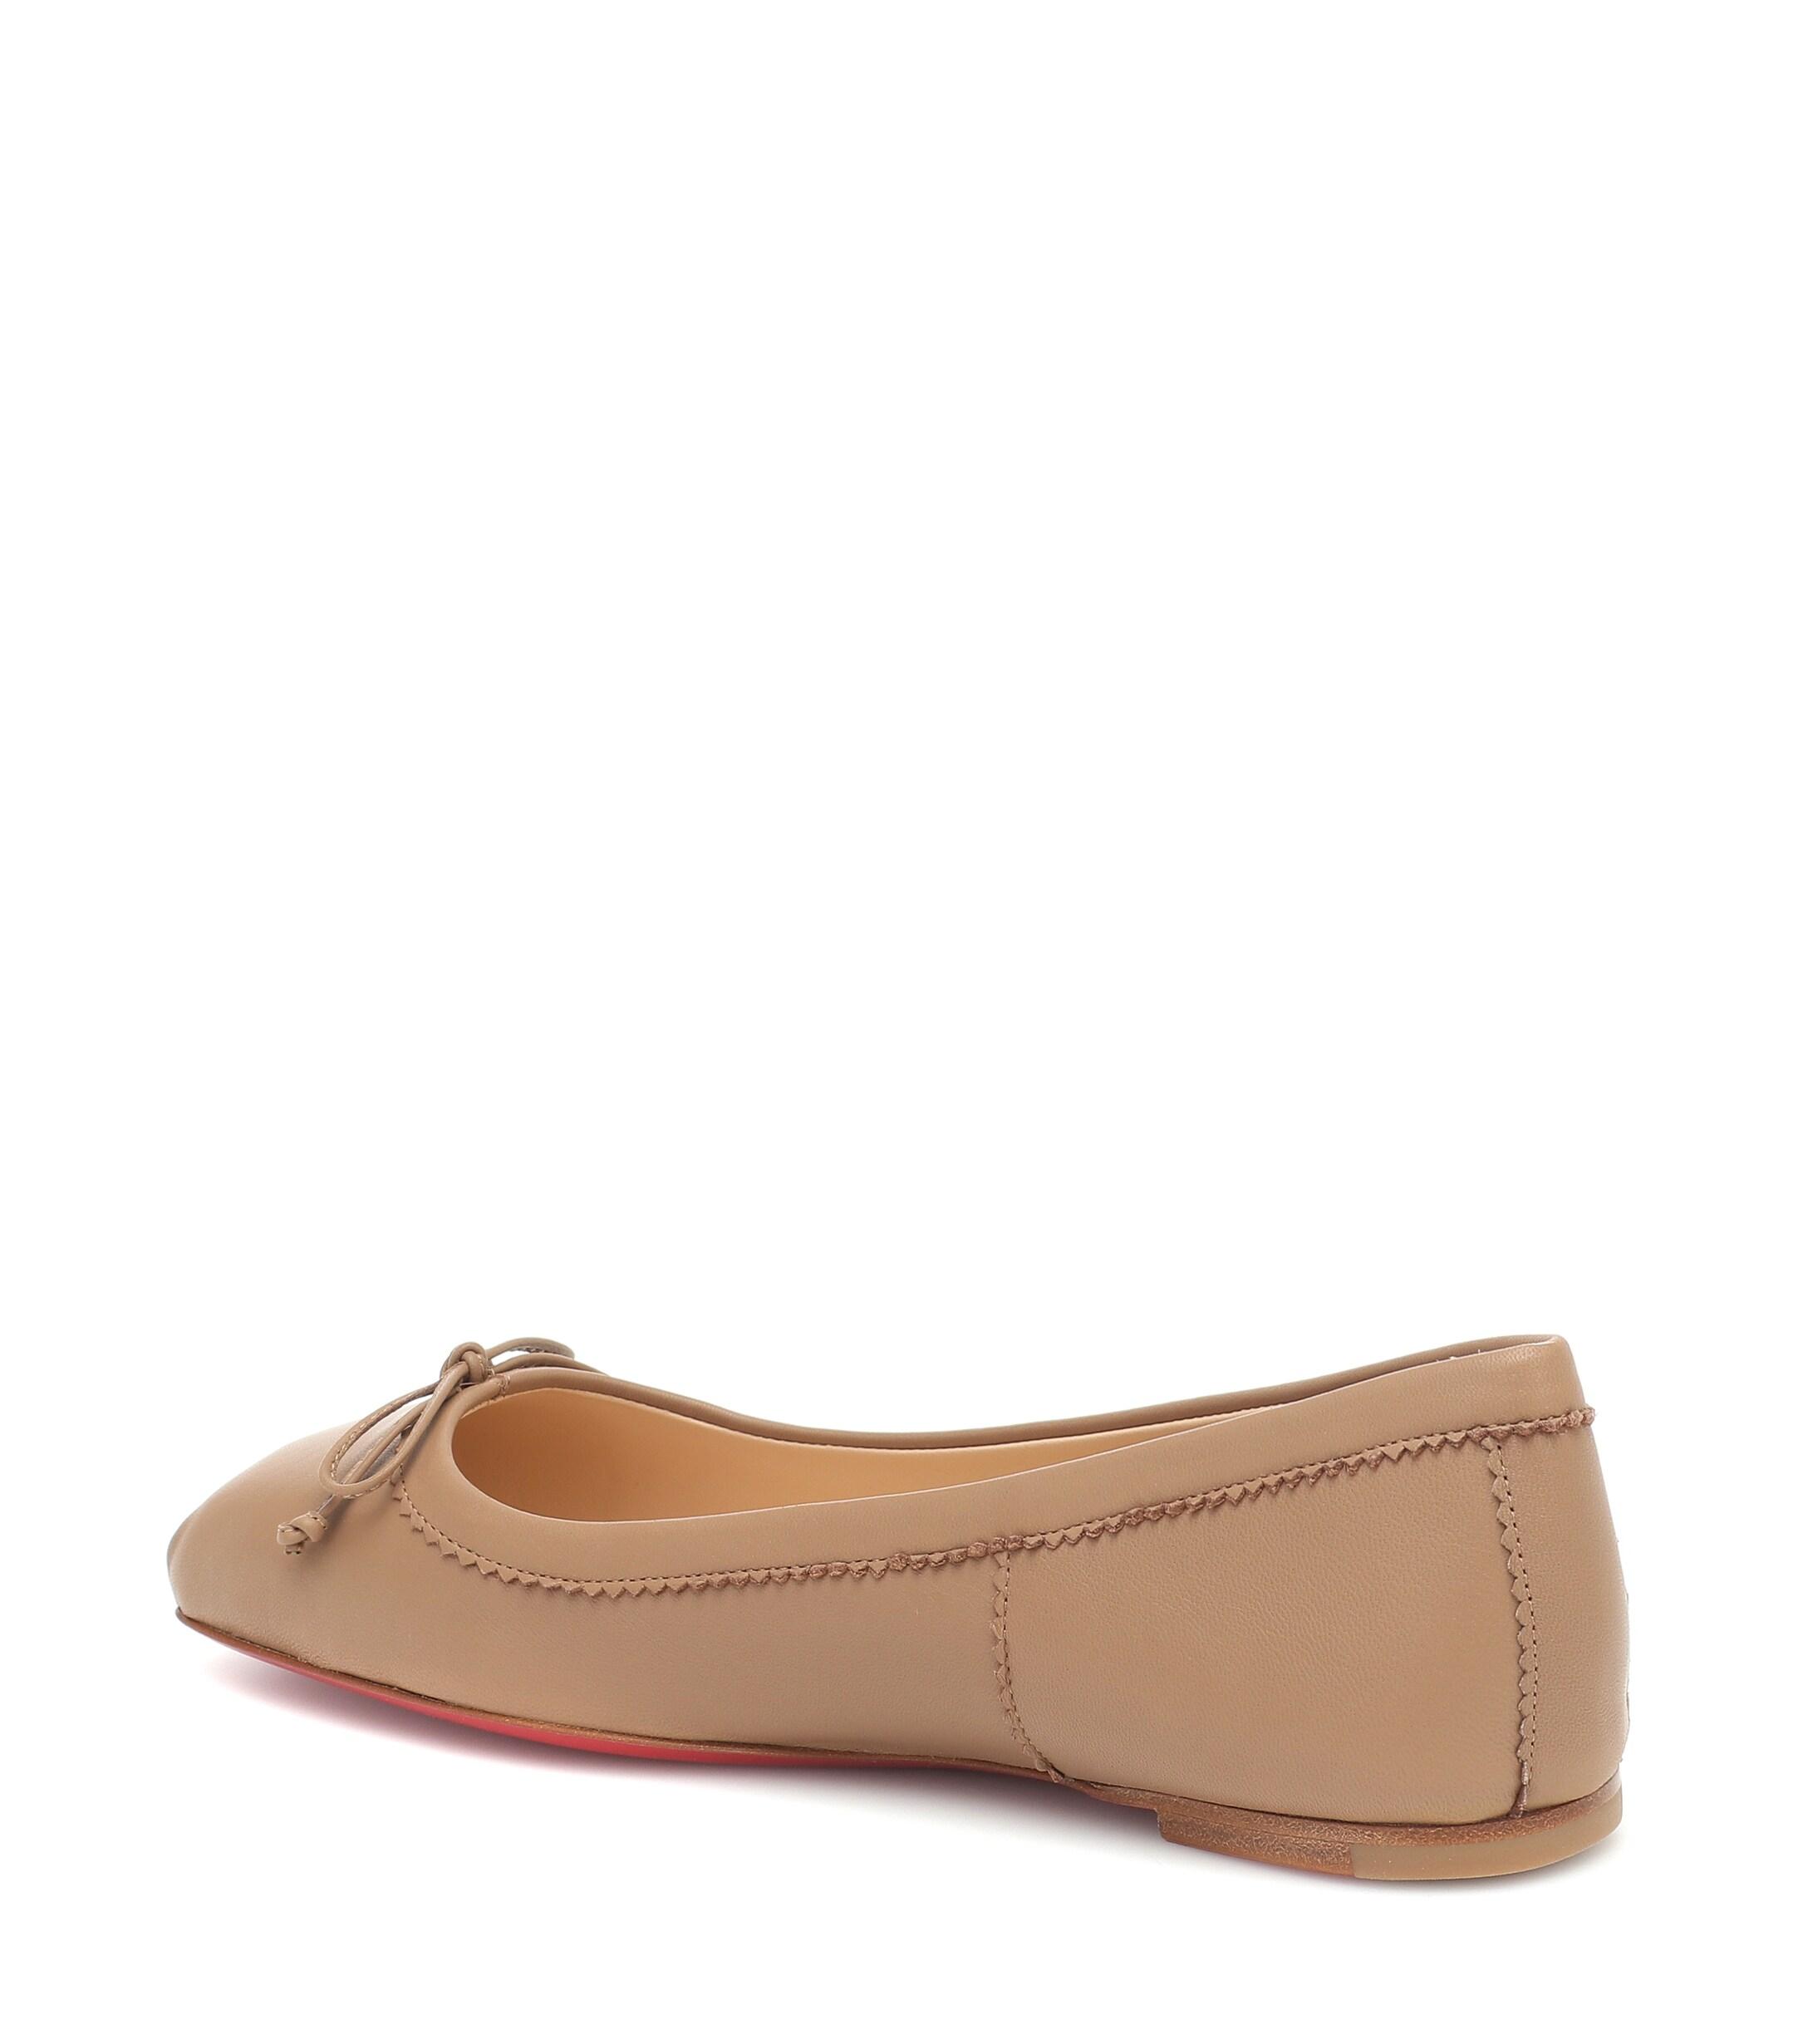 Christian Louboutin Mamadrague Leather Ballet Flats in Brown | Lyst